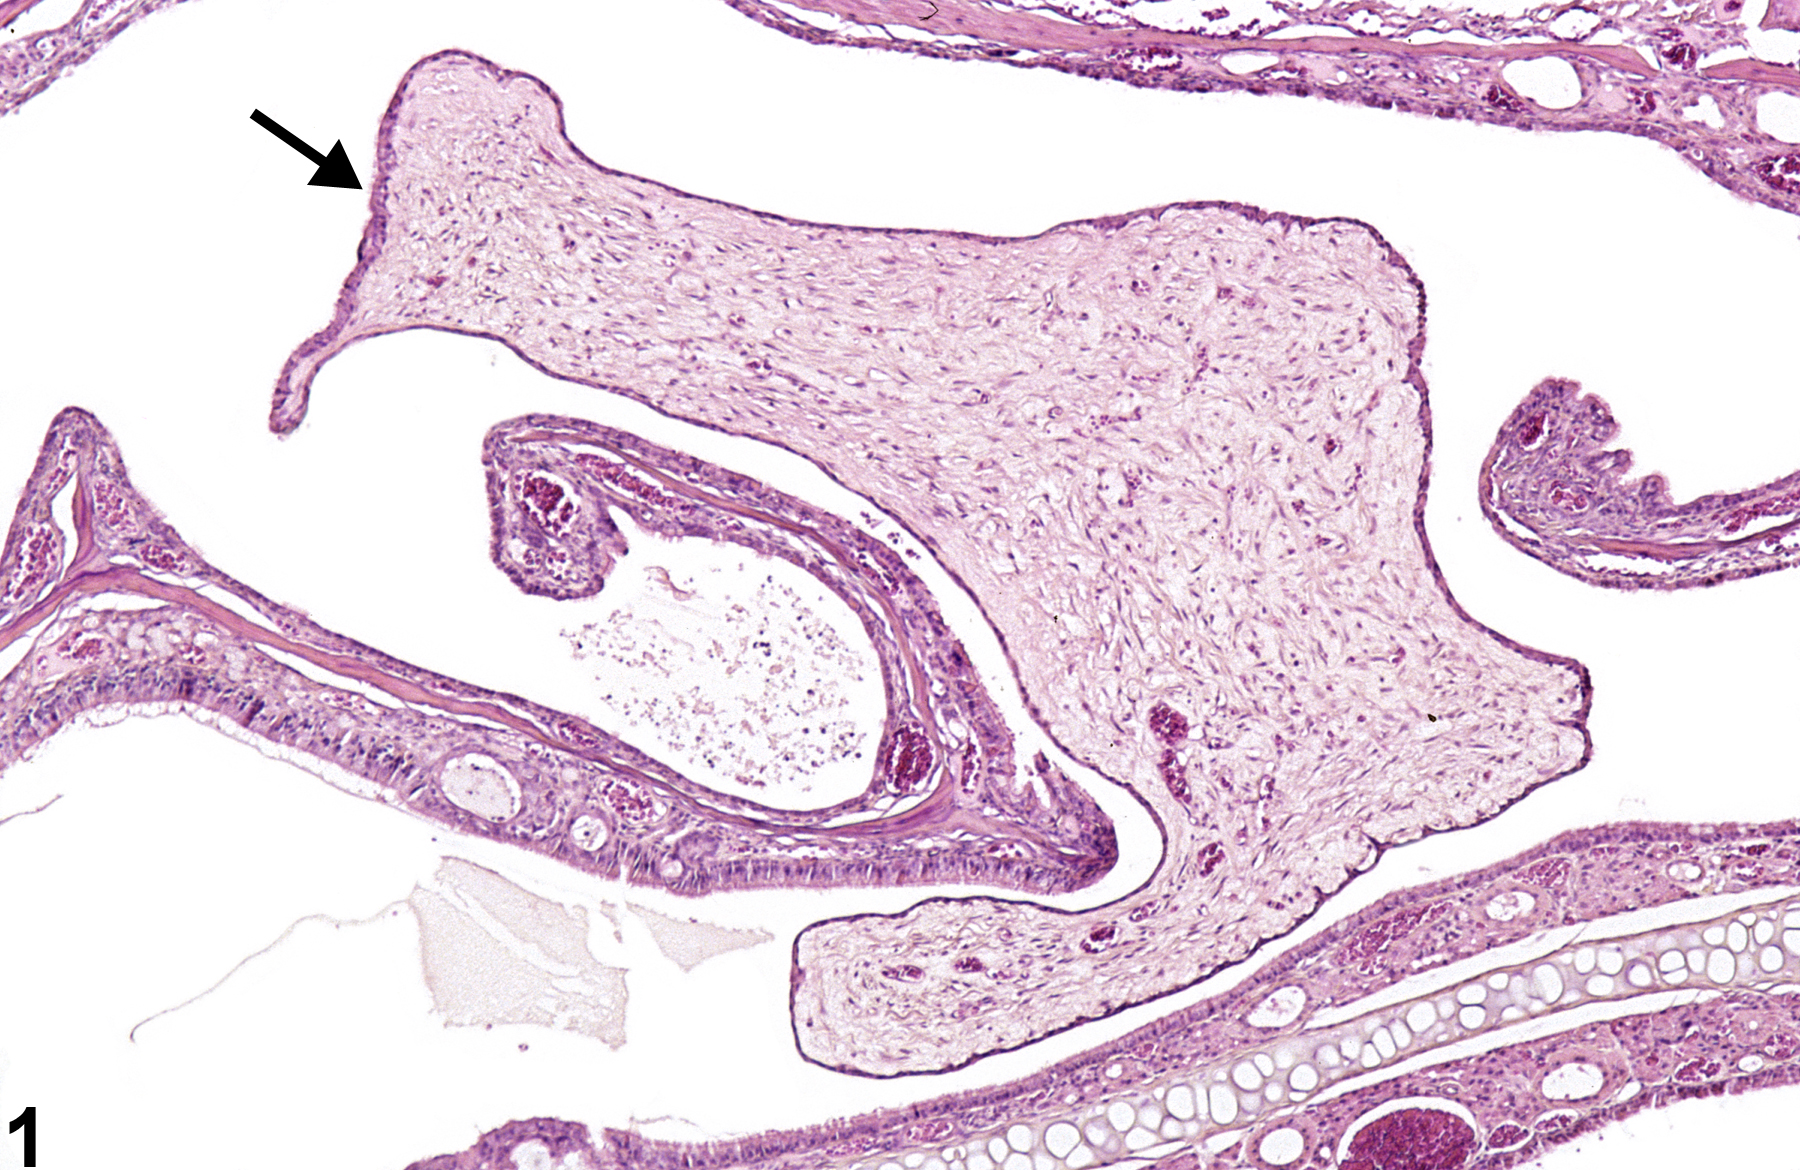 Image of polyp, inflammatory in the nose from a male B6C3F1/N mouse in a chronic study